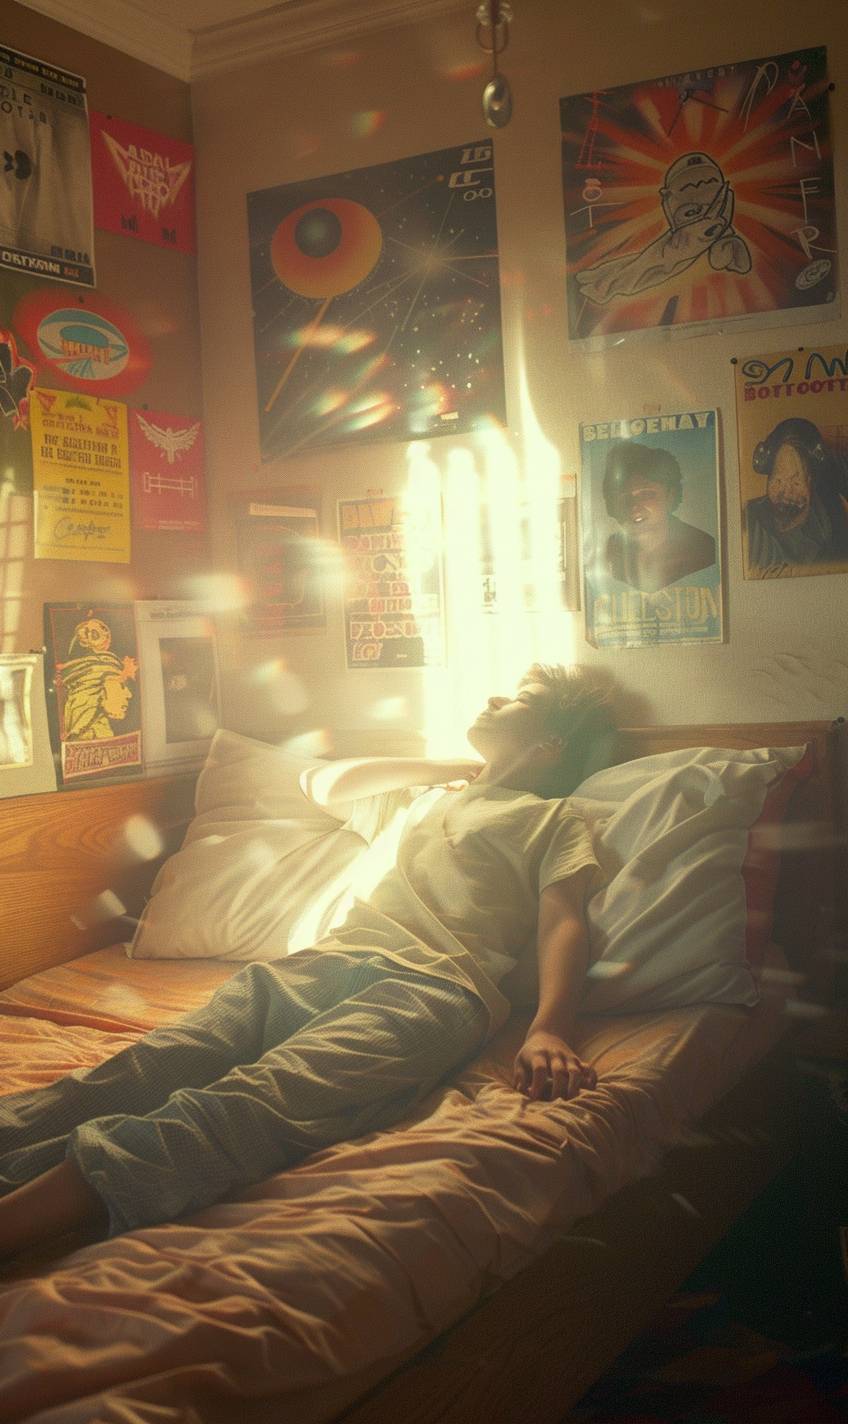 Mexican teenager 16 years old lying on his bed levitating having an astral trip in his room full of rock posters of David Bowie and caifans and teenage things his spirit is leaving his body realistic bright light scene pastel tones. --ar 3:5  --v 6.0